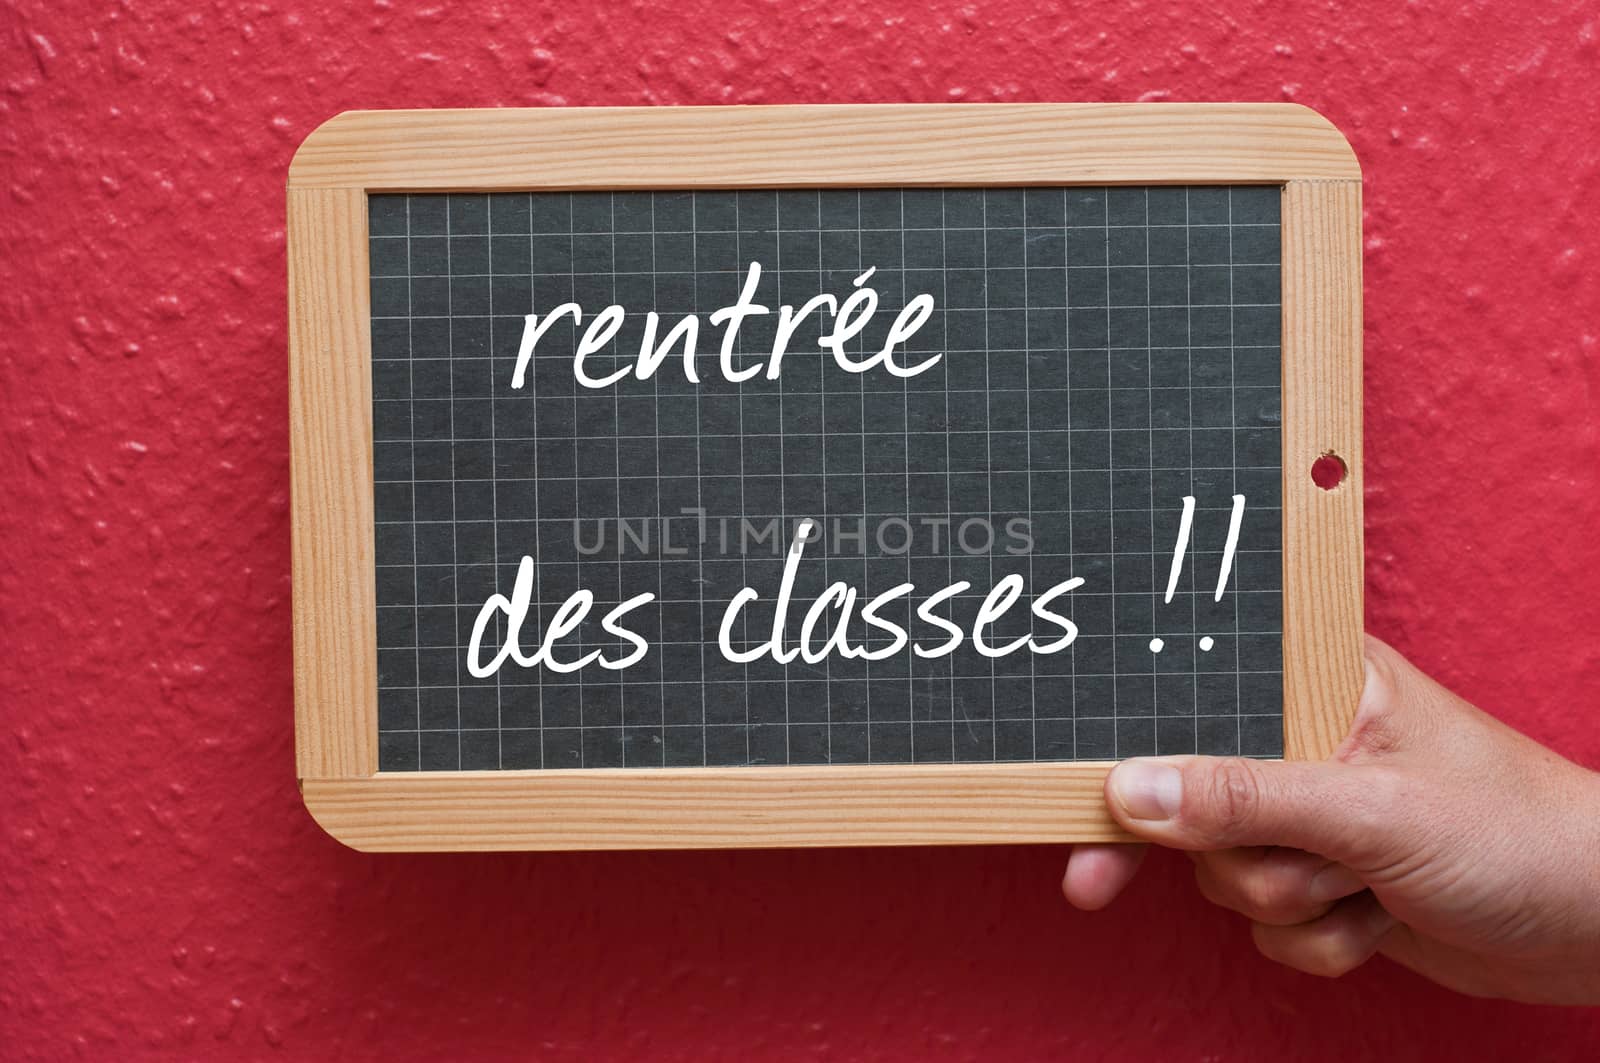 Chalkboard in hand - back to school -text in french